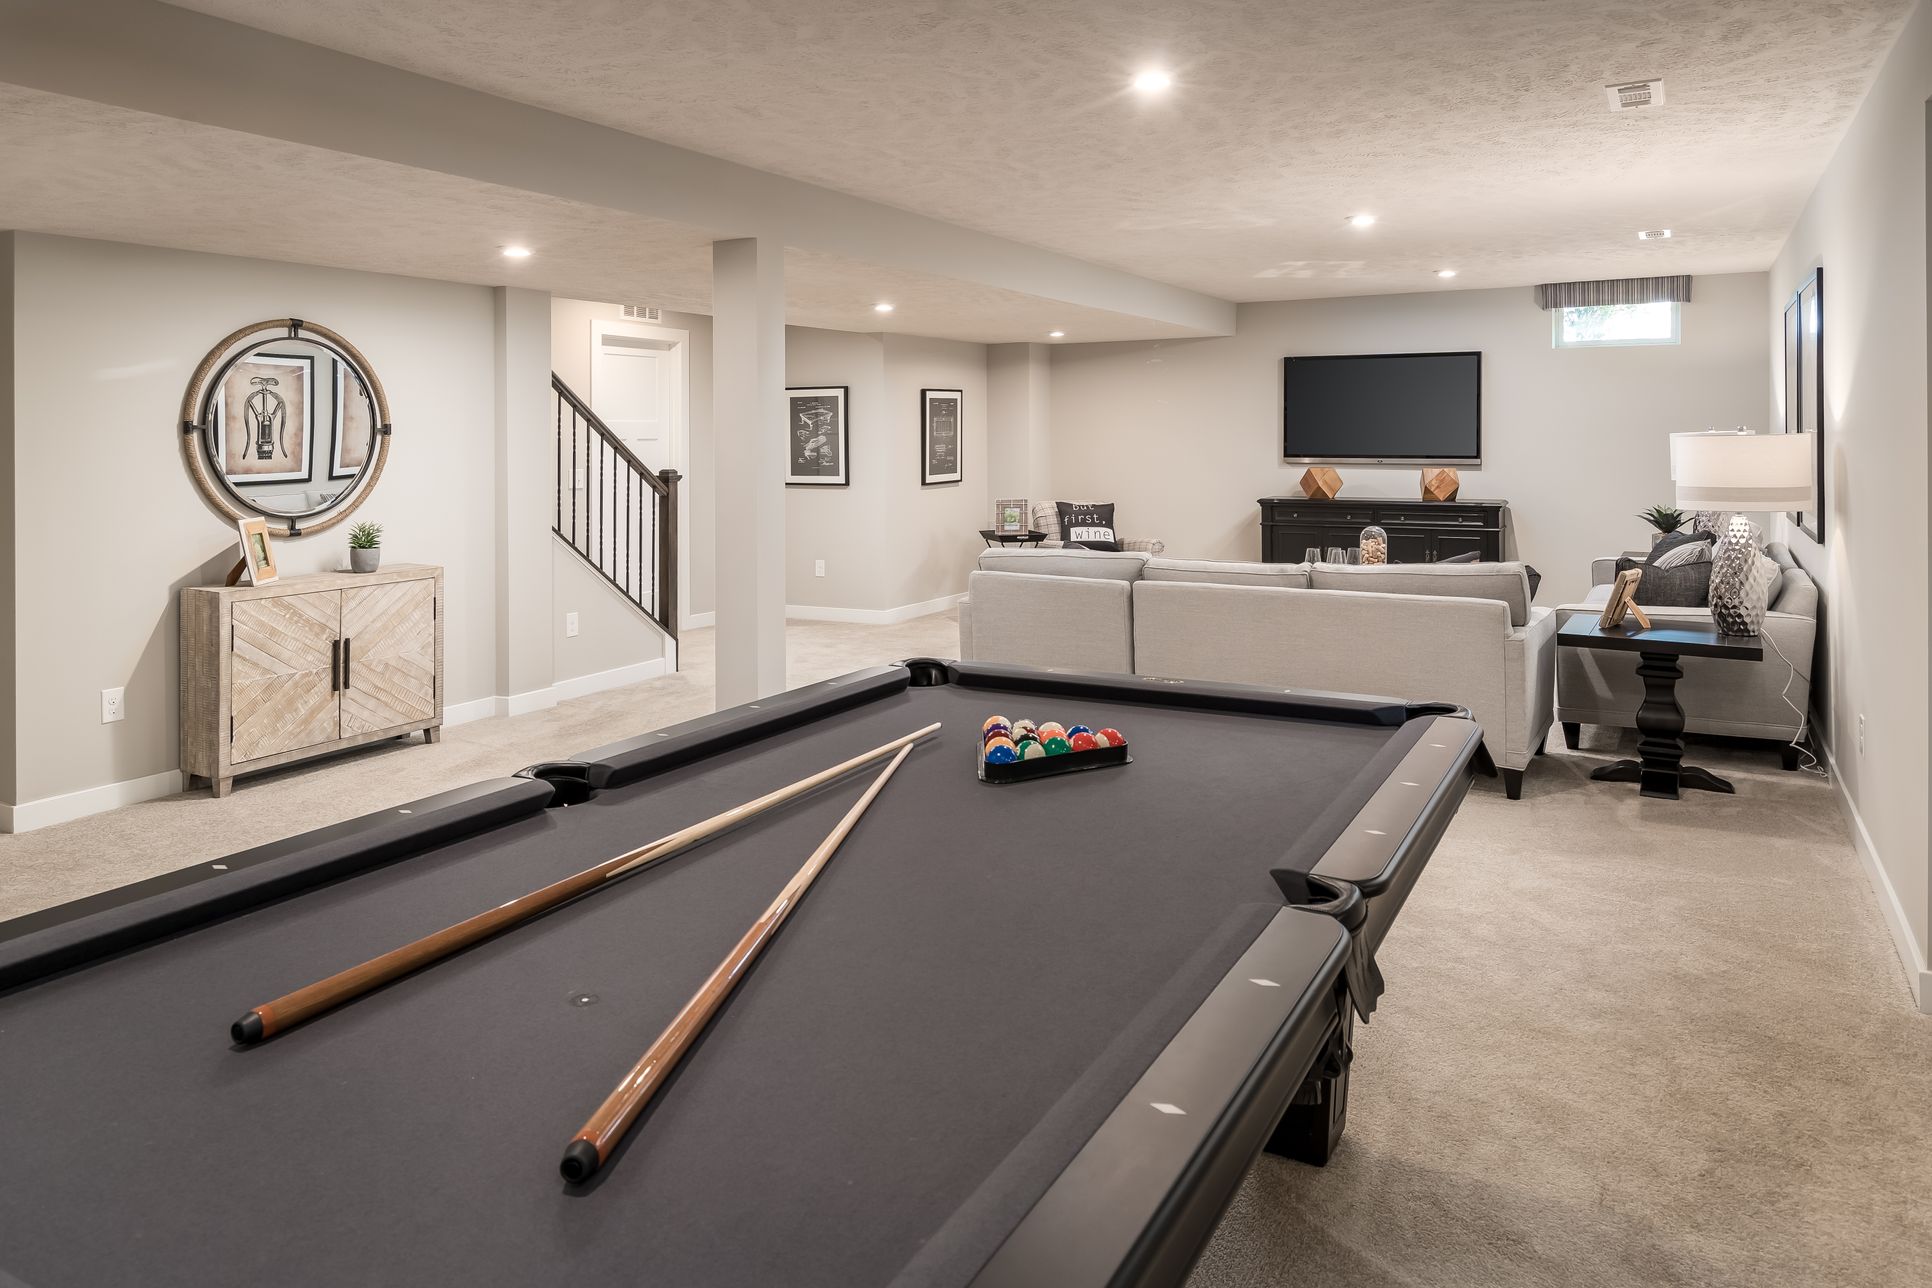 INCLUDED FINISHED BASEMENT FOR MORE ENTERTAINING SPACE